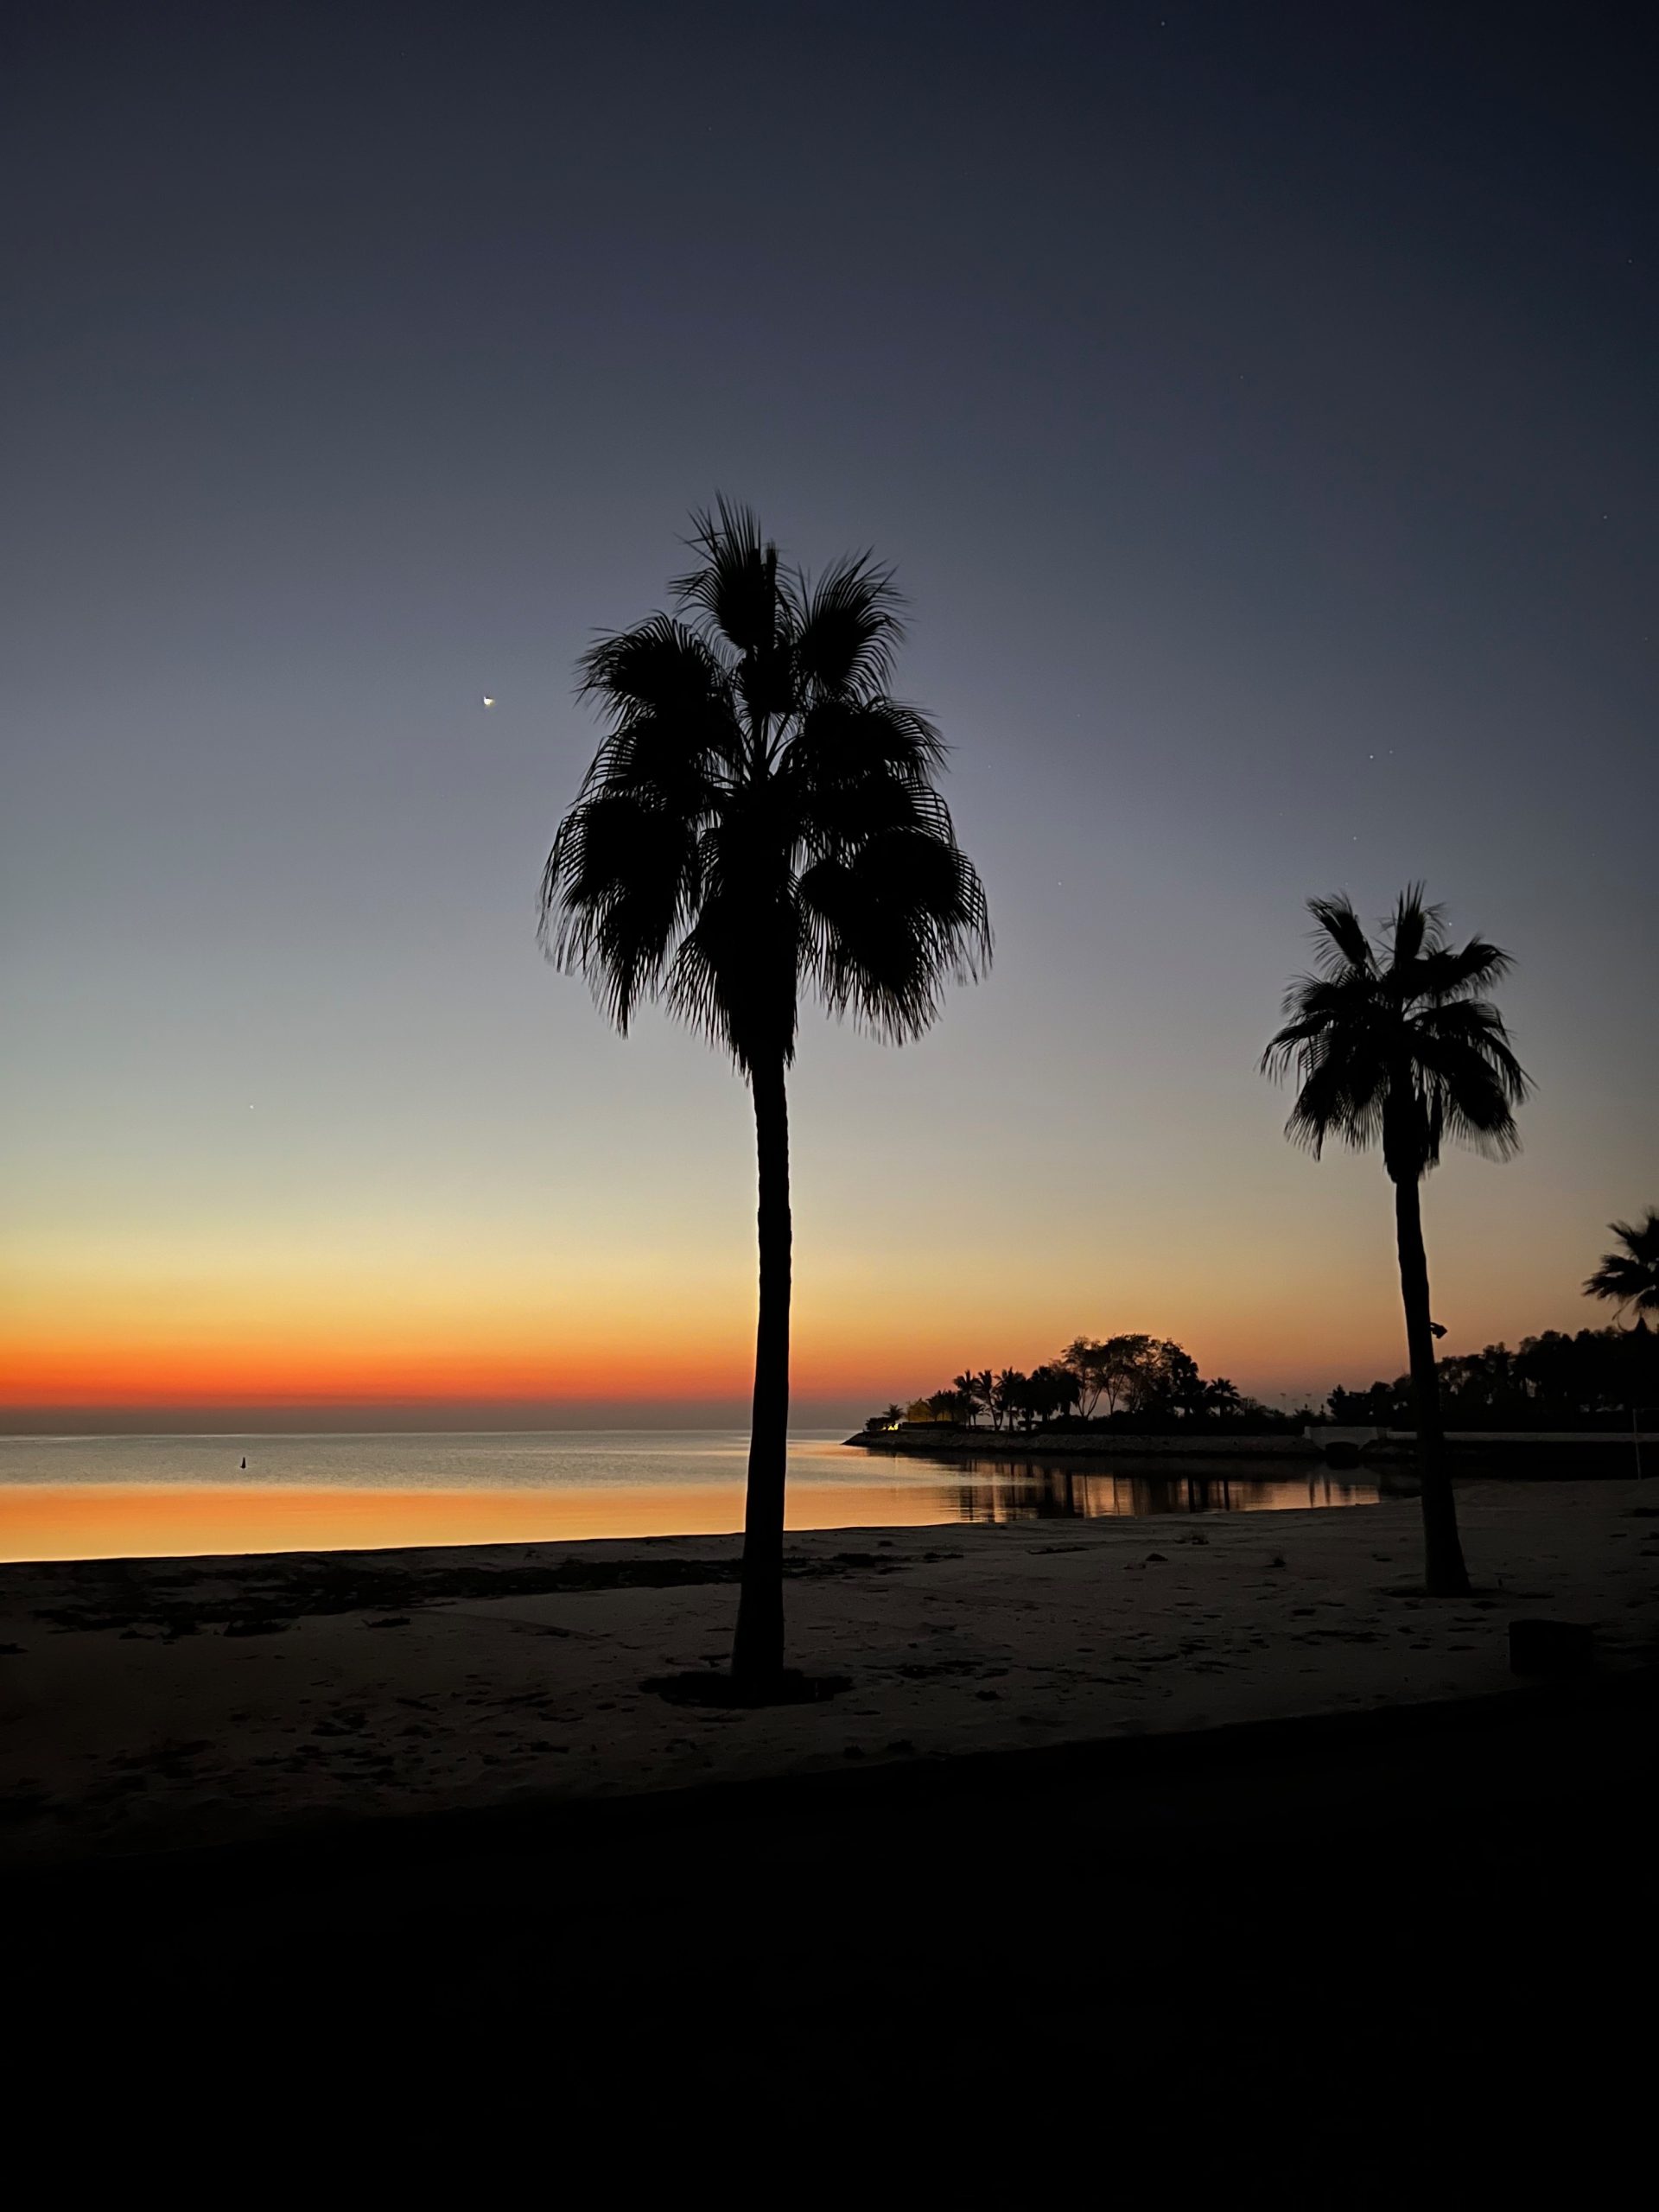 beach with palm trees at sunset or sunrise